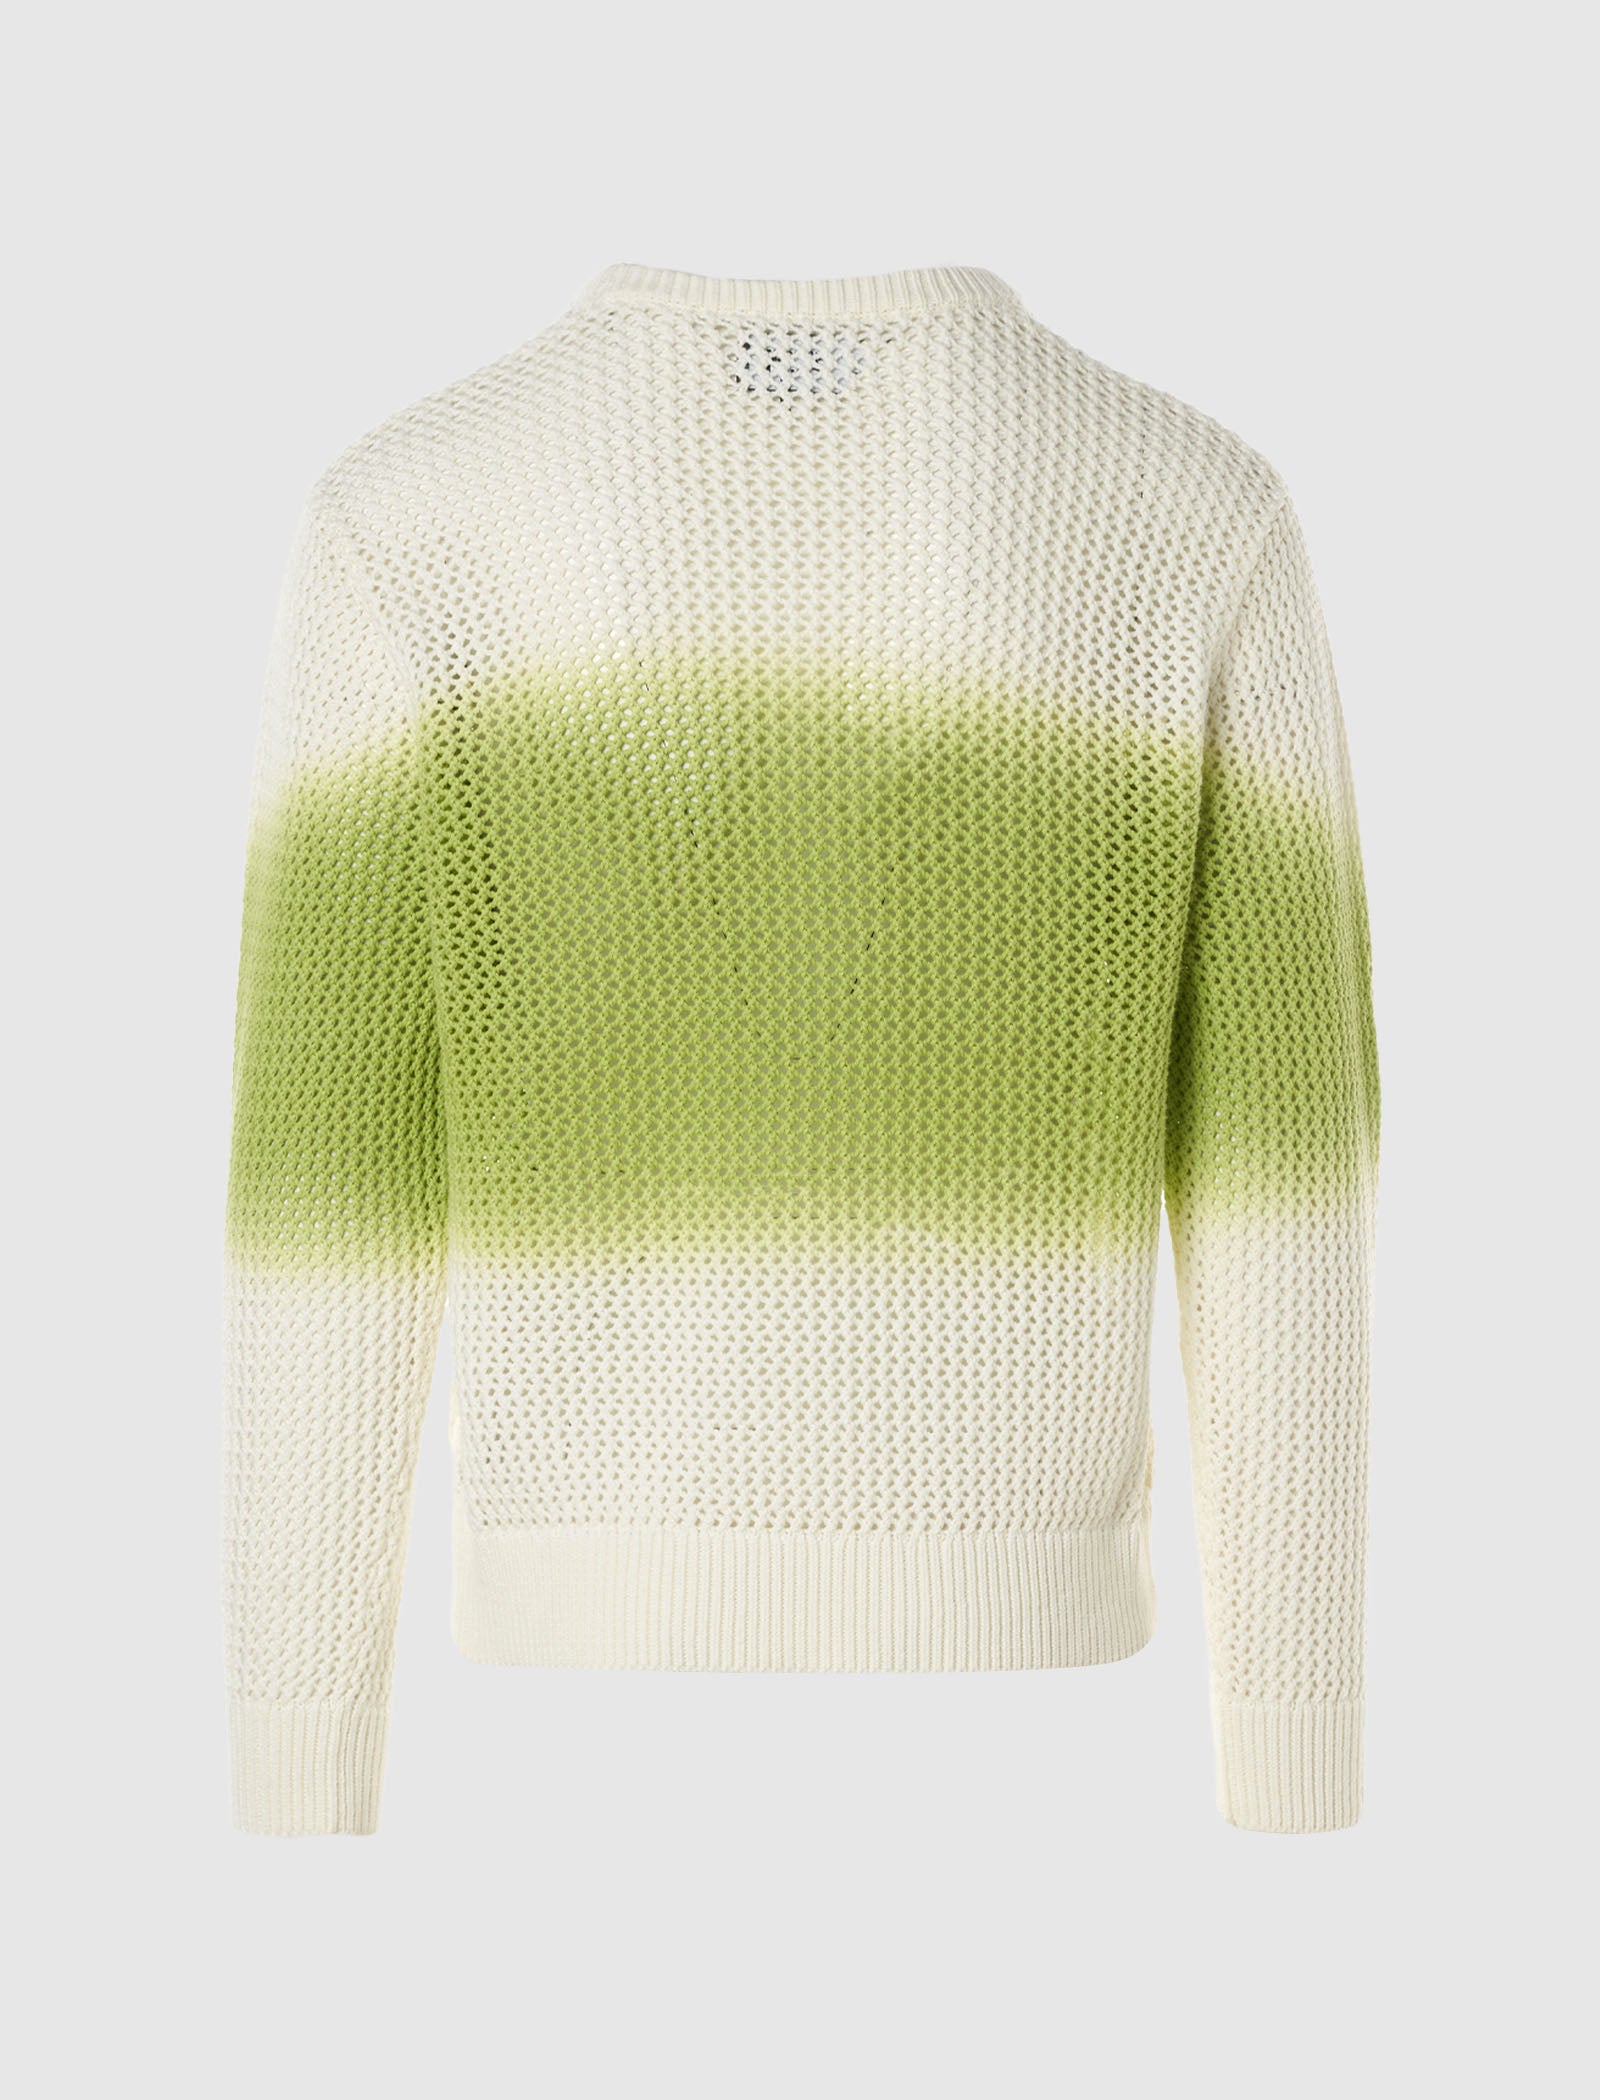 STUSSY PIGMENT DYED SWEATER